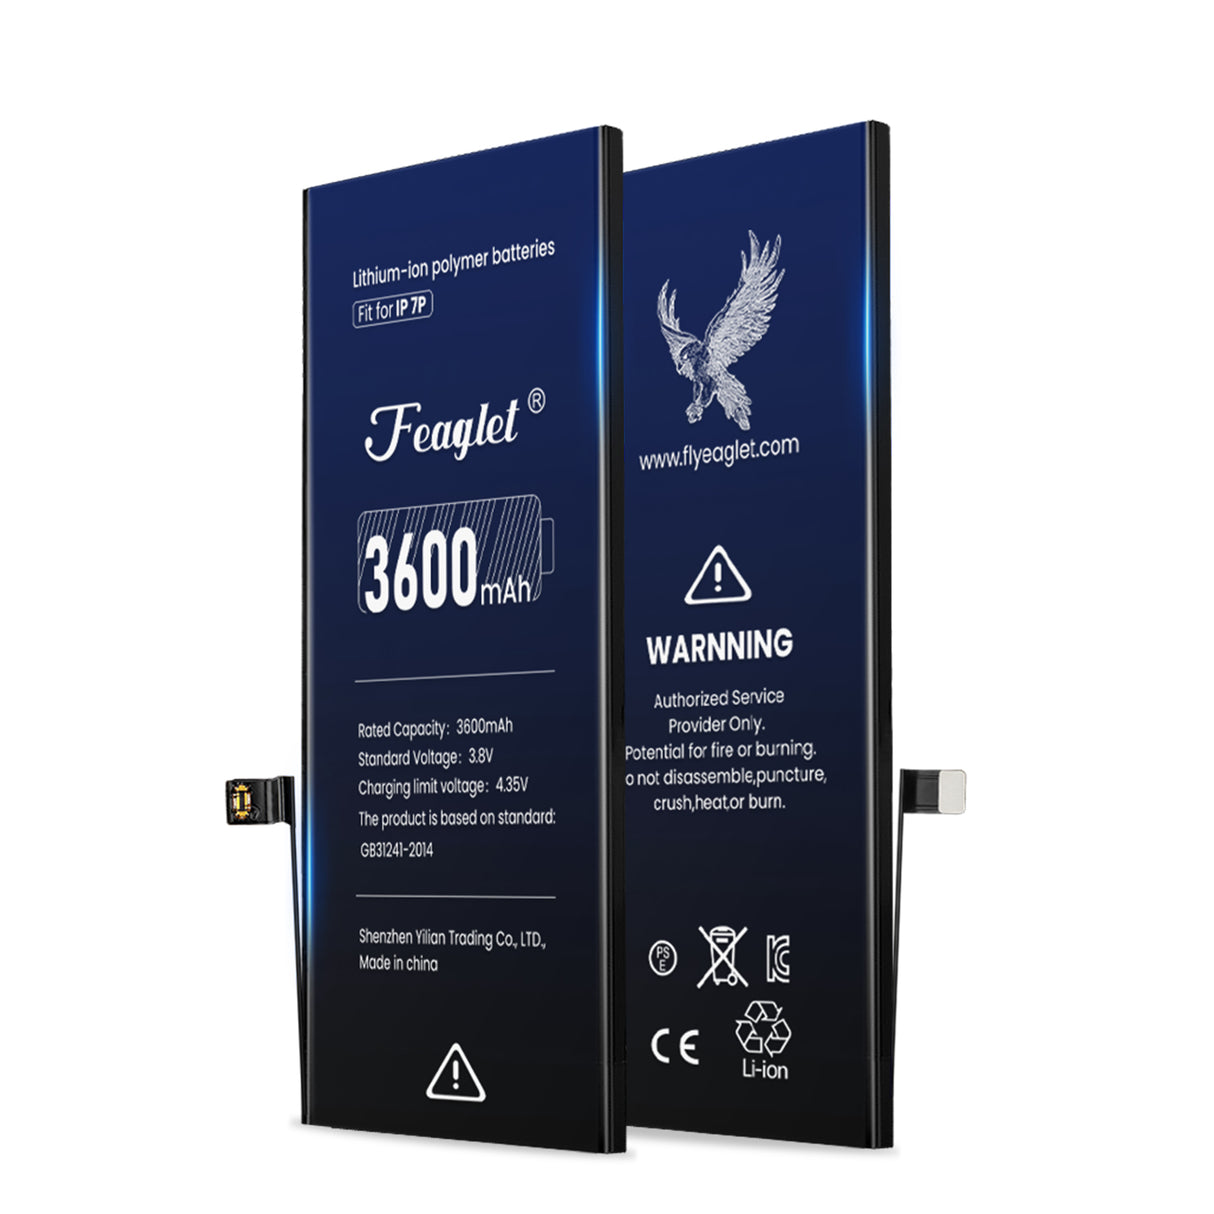 High Capacity iPhone 7 Plus Battery Replacement Original BMS Low Impedance & 800 Cycles Maximum |3600 mAh|-Fly Eagle Feaglet Battery